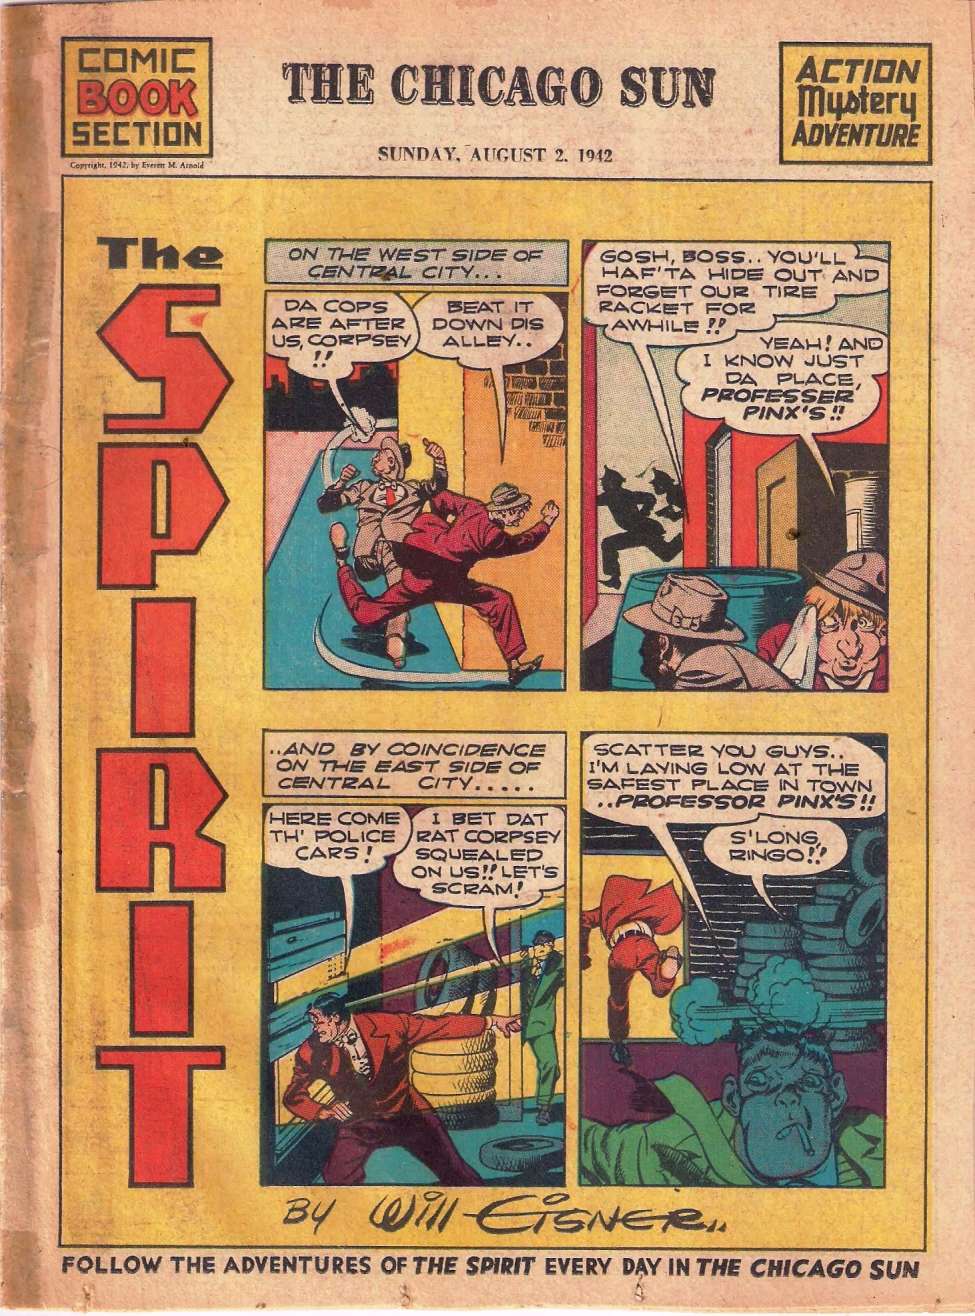 Comic Book Cover For The Spirit (1942-08-02) - Chicago Sun